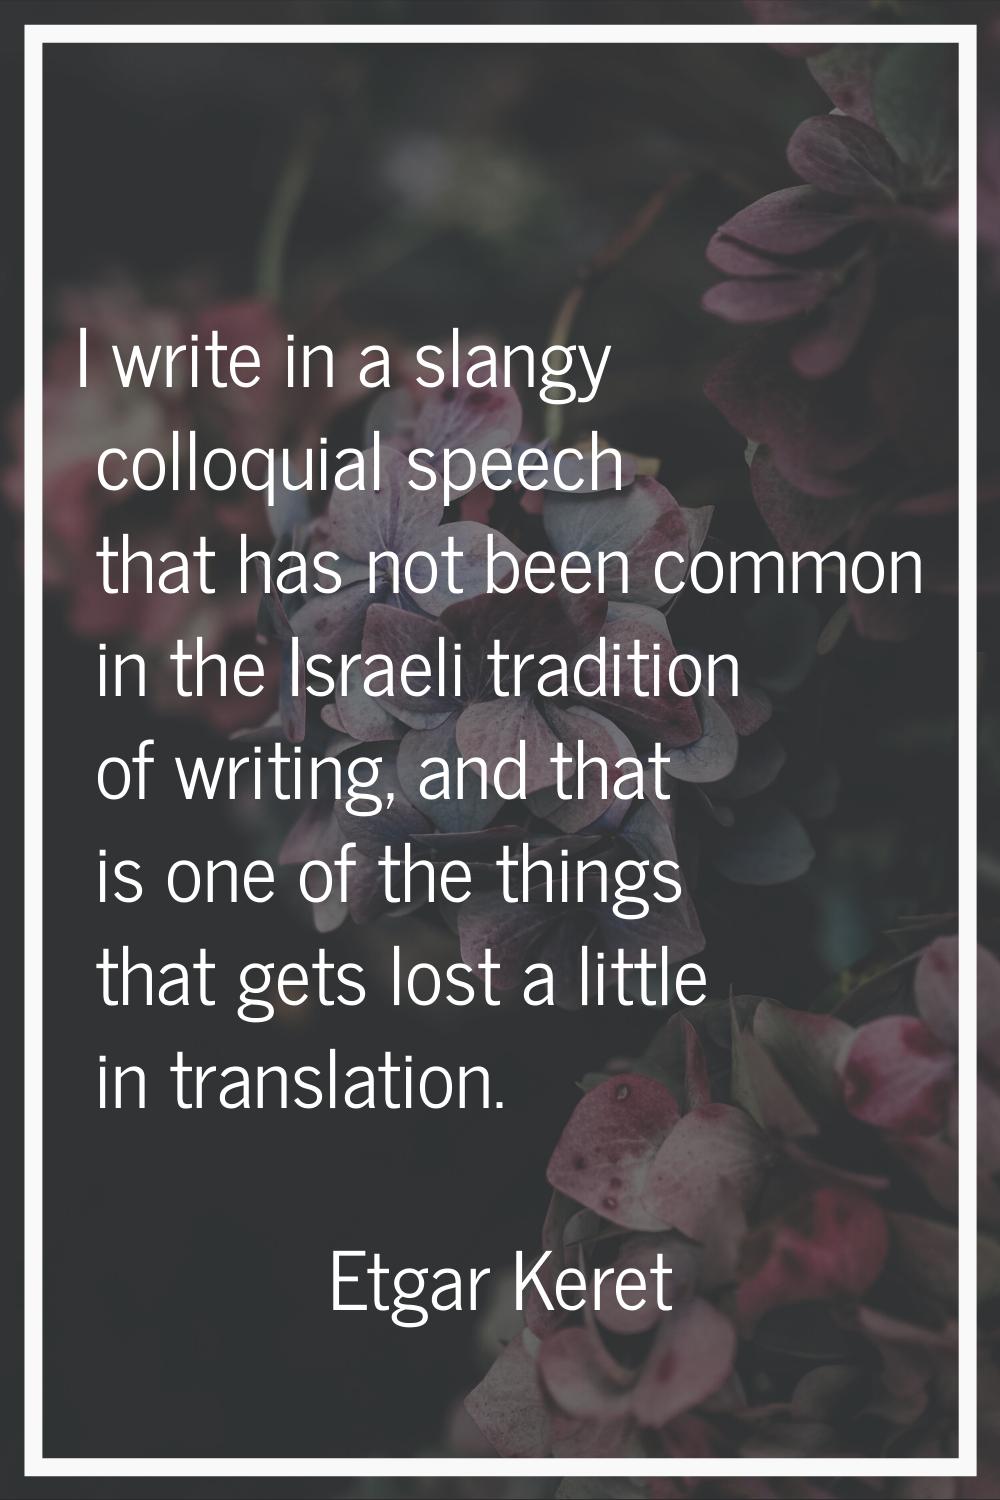 I write in a slangy colloquial speech that has not been common in the Israeli tradition of writing,